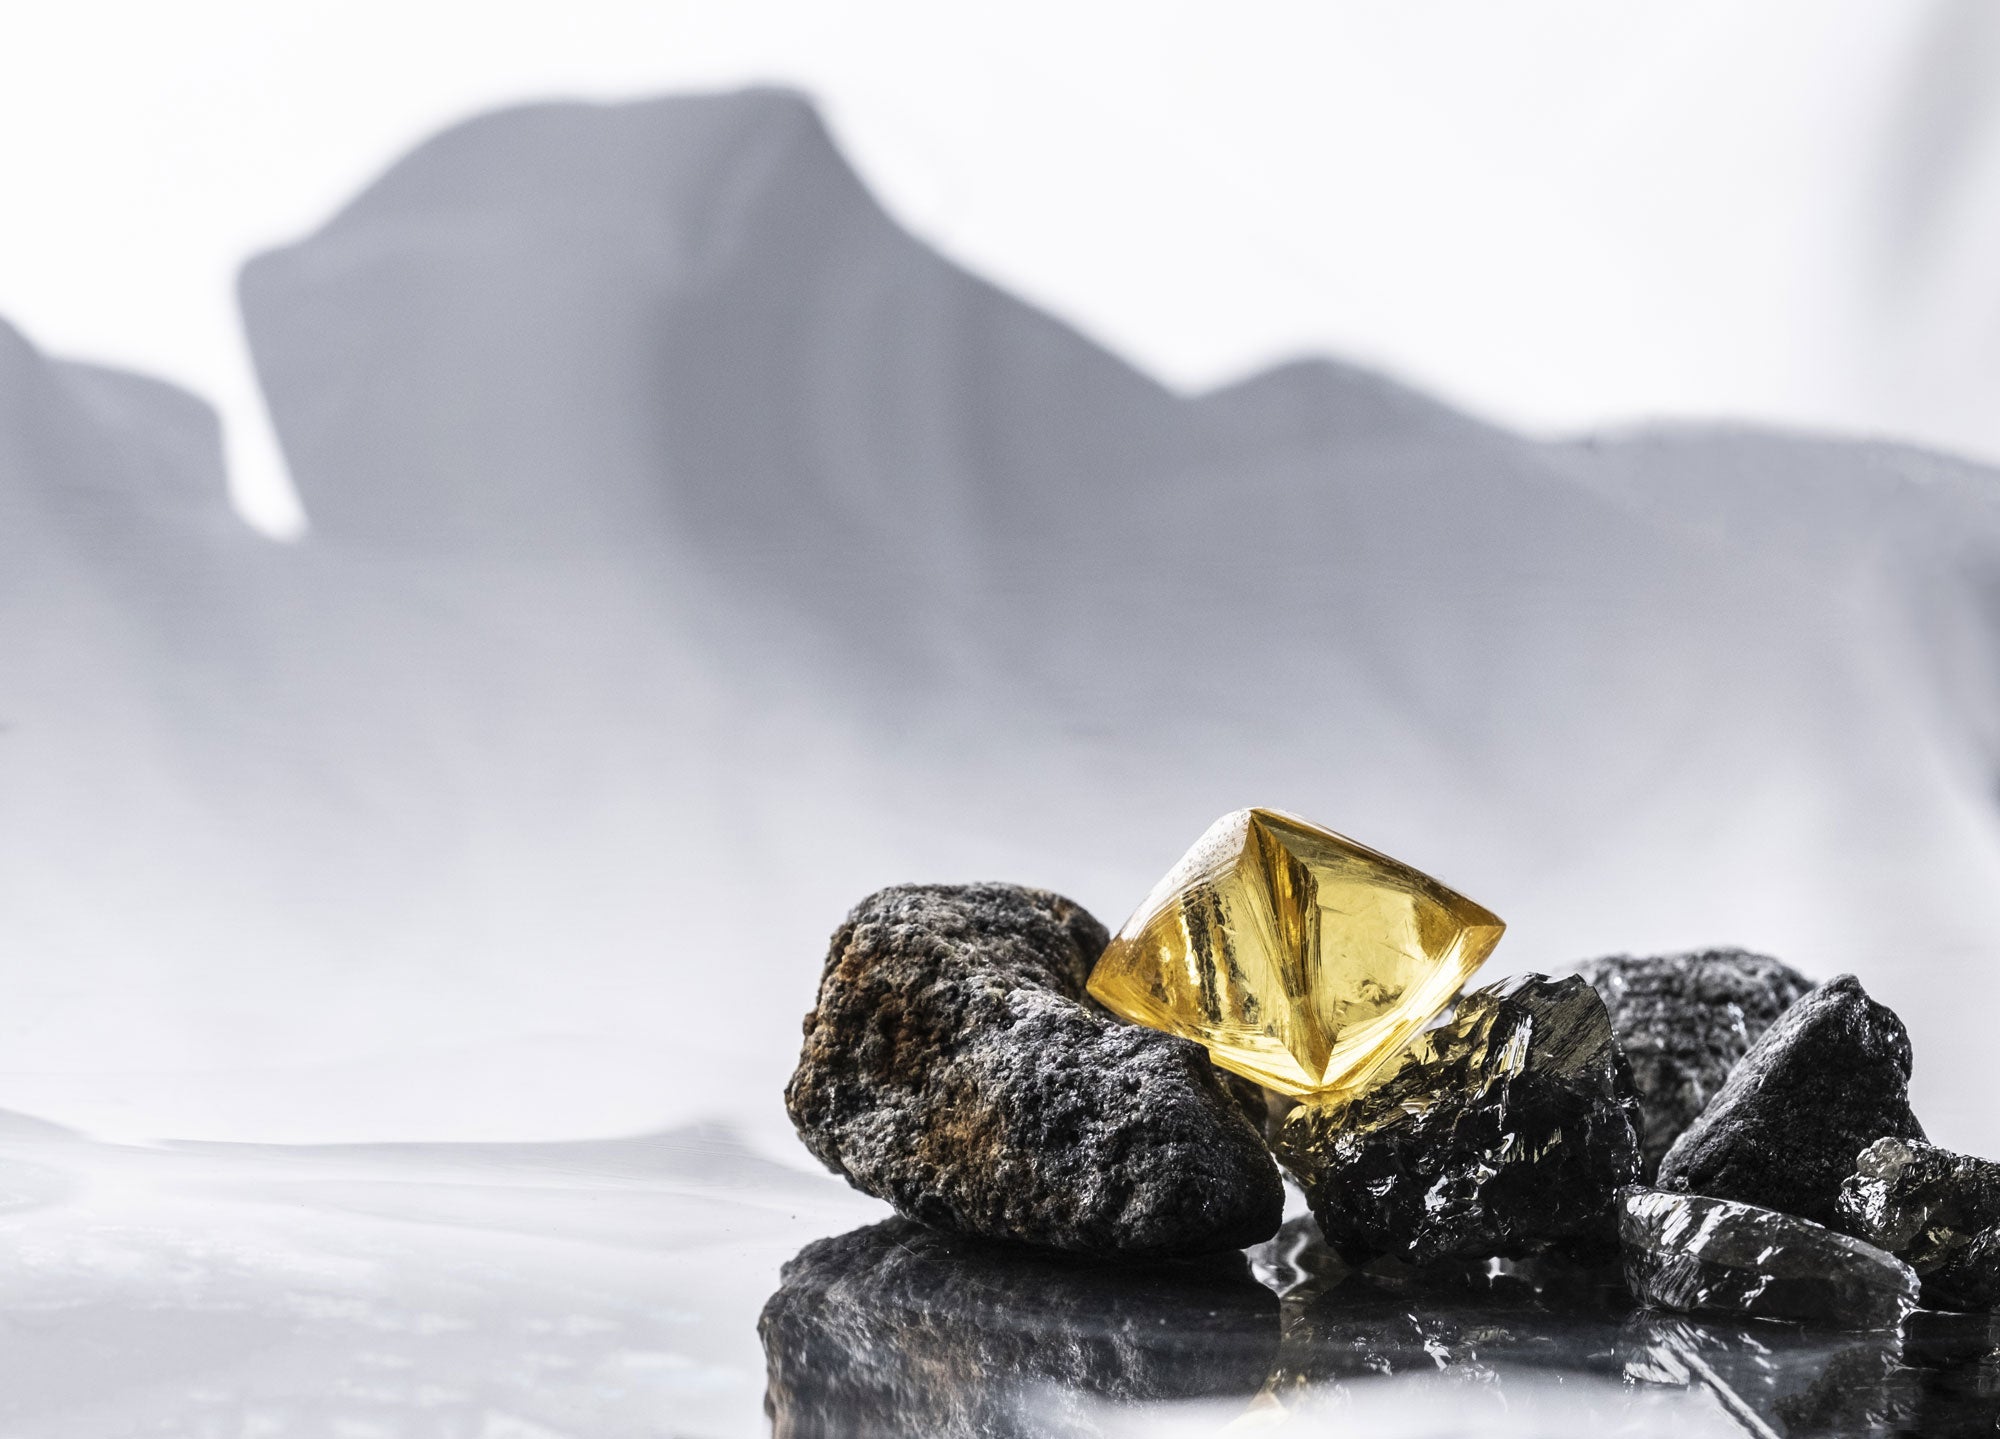 Artic Canadian Diamond Finds The Largest Fancy Vivid Yellow in Canada